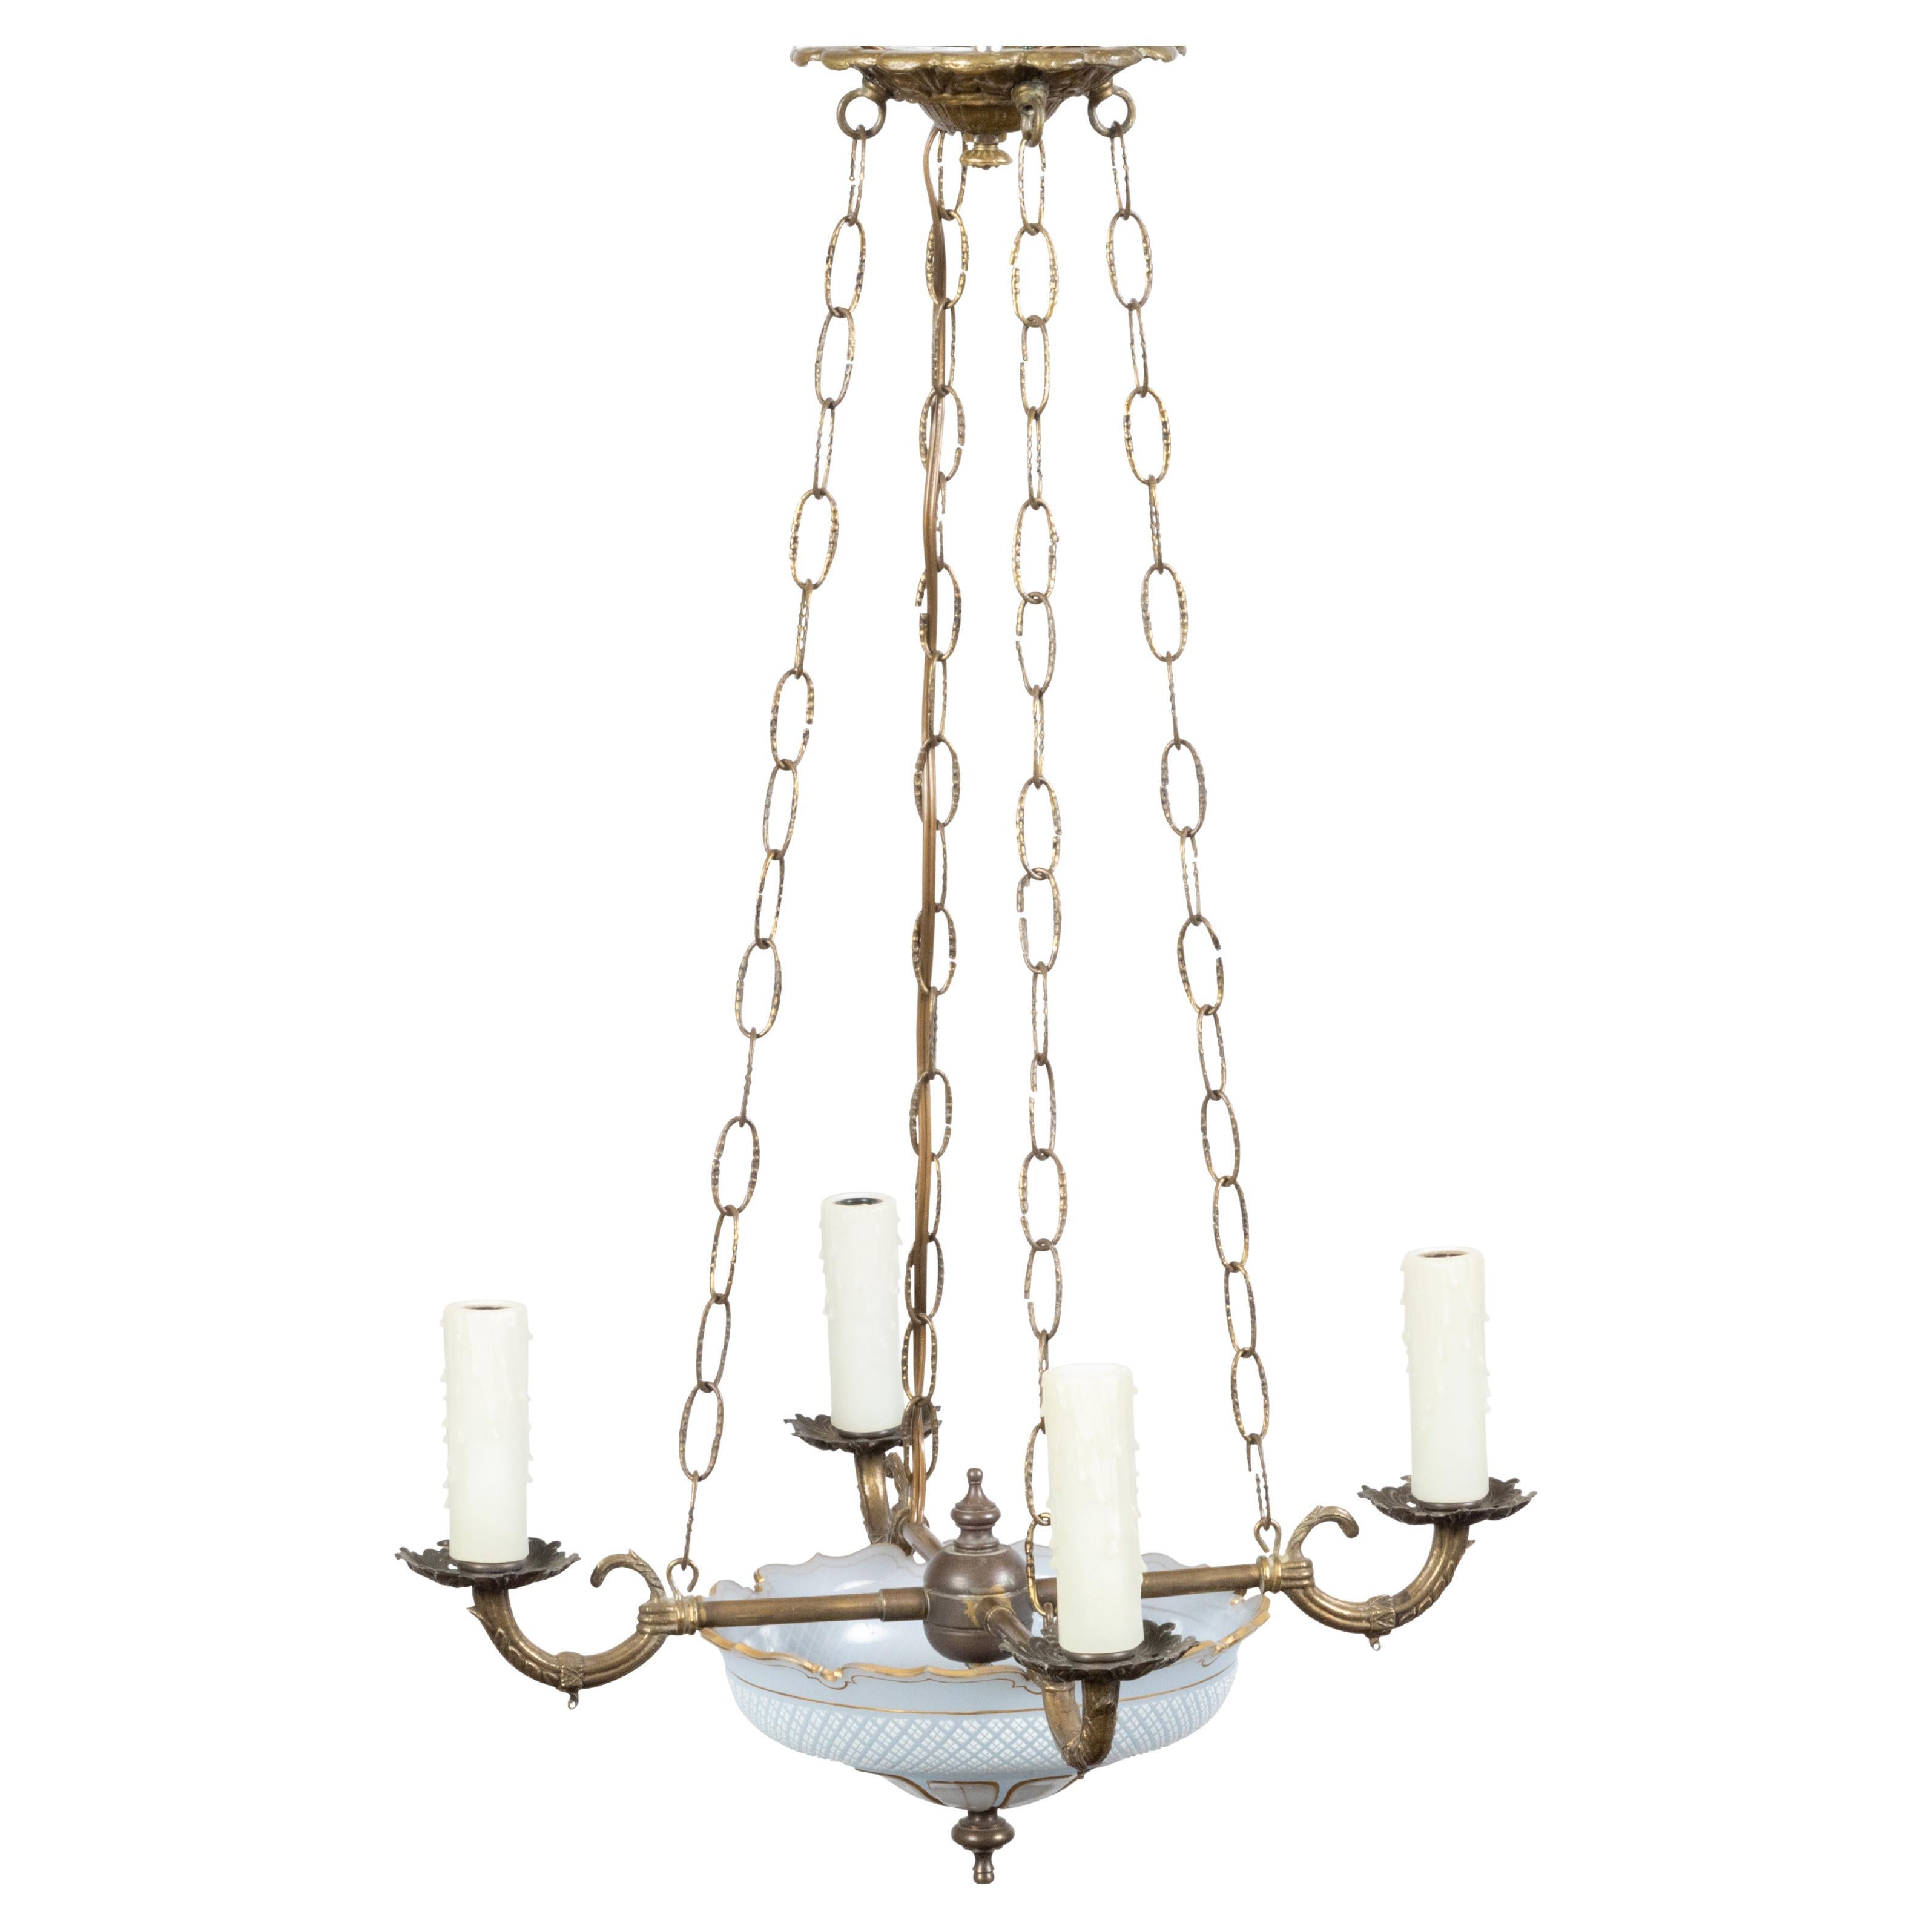 French 1900s Opaline Four-Light Chandelier with Leaf Motifs and Profiled Links For Sale